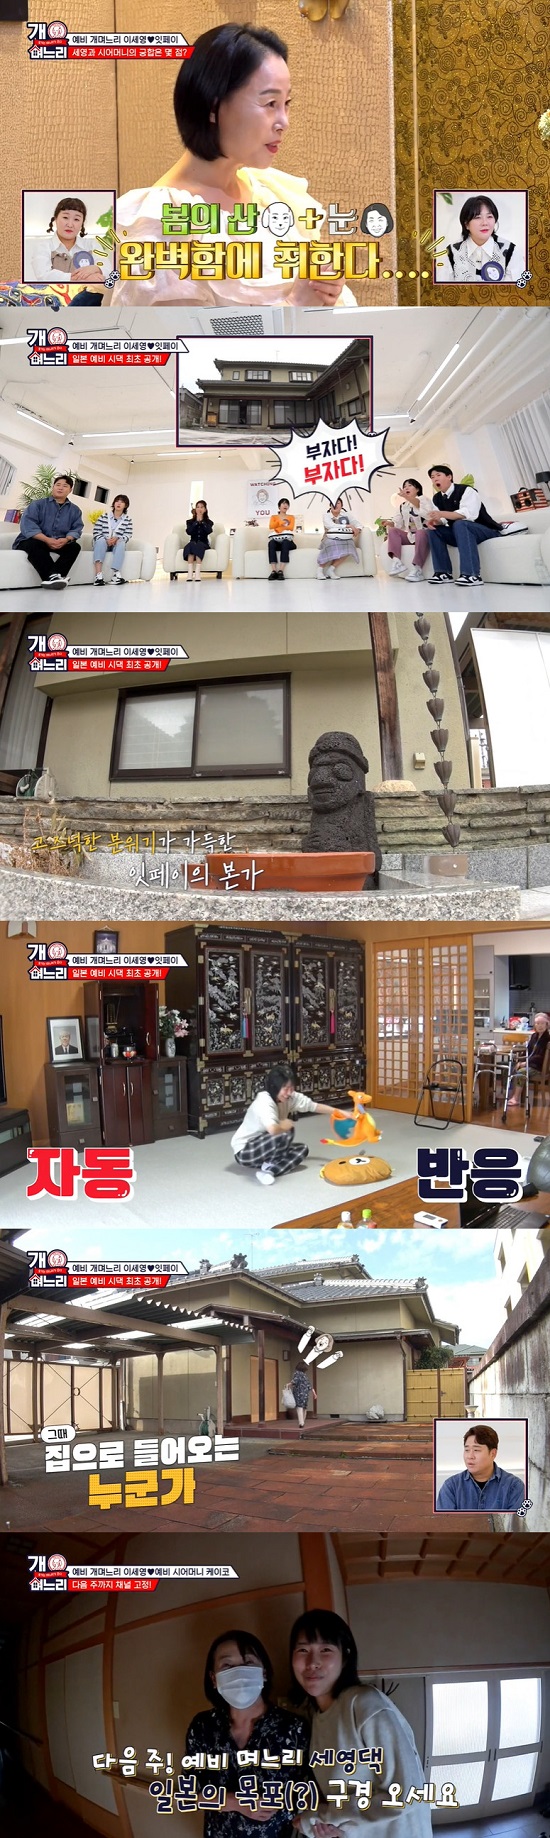 Lee Se-young, who is about to marry, told the story of visiting the home of Wang Feifei, a Japanese boy friend, in the Tcast E channel entertainment program Dog Daughter broadcasted on the 24th.Lee Se-young expressed his love for mother-in-law, saying, I am a respectable senior, but I can assure you that our mother-in-law is the best today.He added, I cant say it myself, but I was surprised when I first went to the Boyfriend Japan house after dating (Wang Feifei). Wealthy. Thats all Im going to say.Hu Anna and Lee Su-ji laughed at Lee Se-young, saying, Congratulations, its so good and marriage must be done.Yang Se-chan asked, How did you know (that it was Wealthy) even though you didnt see the bank statement? and Lee Se-young predicted Laws visit, saying, Look around if youre curious.Lee Se-young visited the famous Tarot house to see Wang Feifei, The Princess and the Matchmaker before going to Japan.Lee Se-young said, We are about to marry. The Princess and the Matchmaker It has been about four years since I last saw it. It was so bad.I was careful during that period because I broke up within six months. When the couple received a comment that they must have had a lot of tension with each other, Lee Se-young confessed, Do I like it too much? I thought I liked it alone.Lee Se-young likes his opponent, but hes a lonely card. He doesnt seem to be fulfilled, the hypnotist said, calling on It Wang Feifei to add more expression.The marriage is likely to go smoothly, he said, noting that they had picked up the marriage card.Lee Se-young and mother-in-law The Princess and the Matchmaker said, The mother-in-law personality is not a weak personality. It is winter snow. Lee Se-young is spring mountain.The Princess and the Matchmaker fit very well. On the other hand, Lee Se-young revealed the home of Wang Feifei. When the magnificent mansion was revealed, Hu Anna was surprised to say, Wealthy, Wealthy.Lee Se-young then caught the attention of the Laws family in the living room of the home where the old-fashioned interior stands out.Lee Se-young and mother-in-law met each other in three years and hugged each other and hugged each other.Picture = Tcast E Channel Broadcast Screen